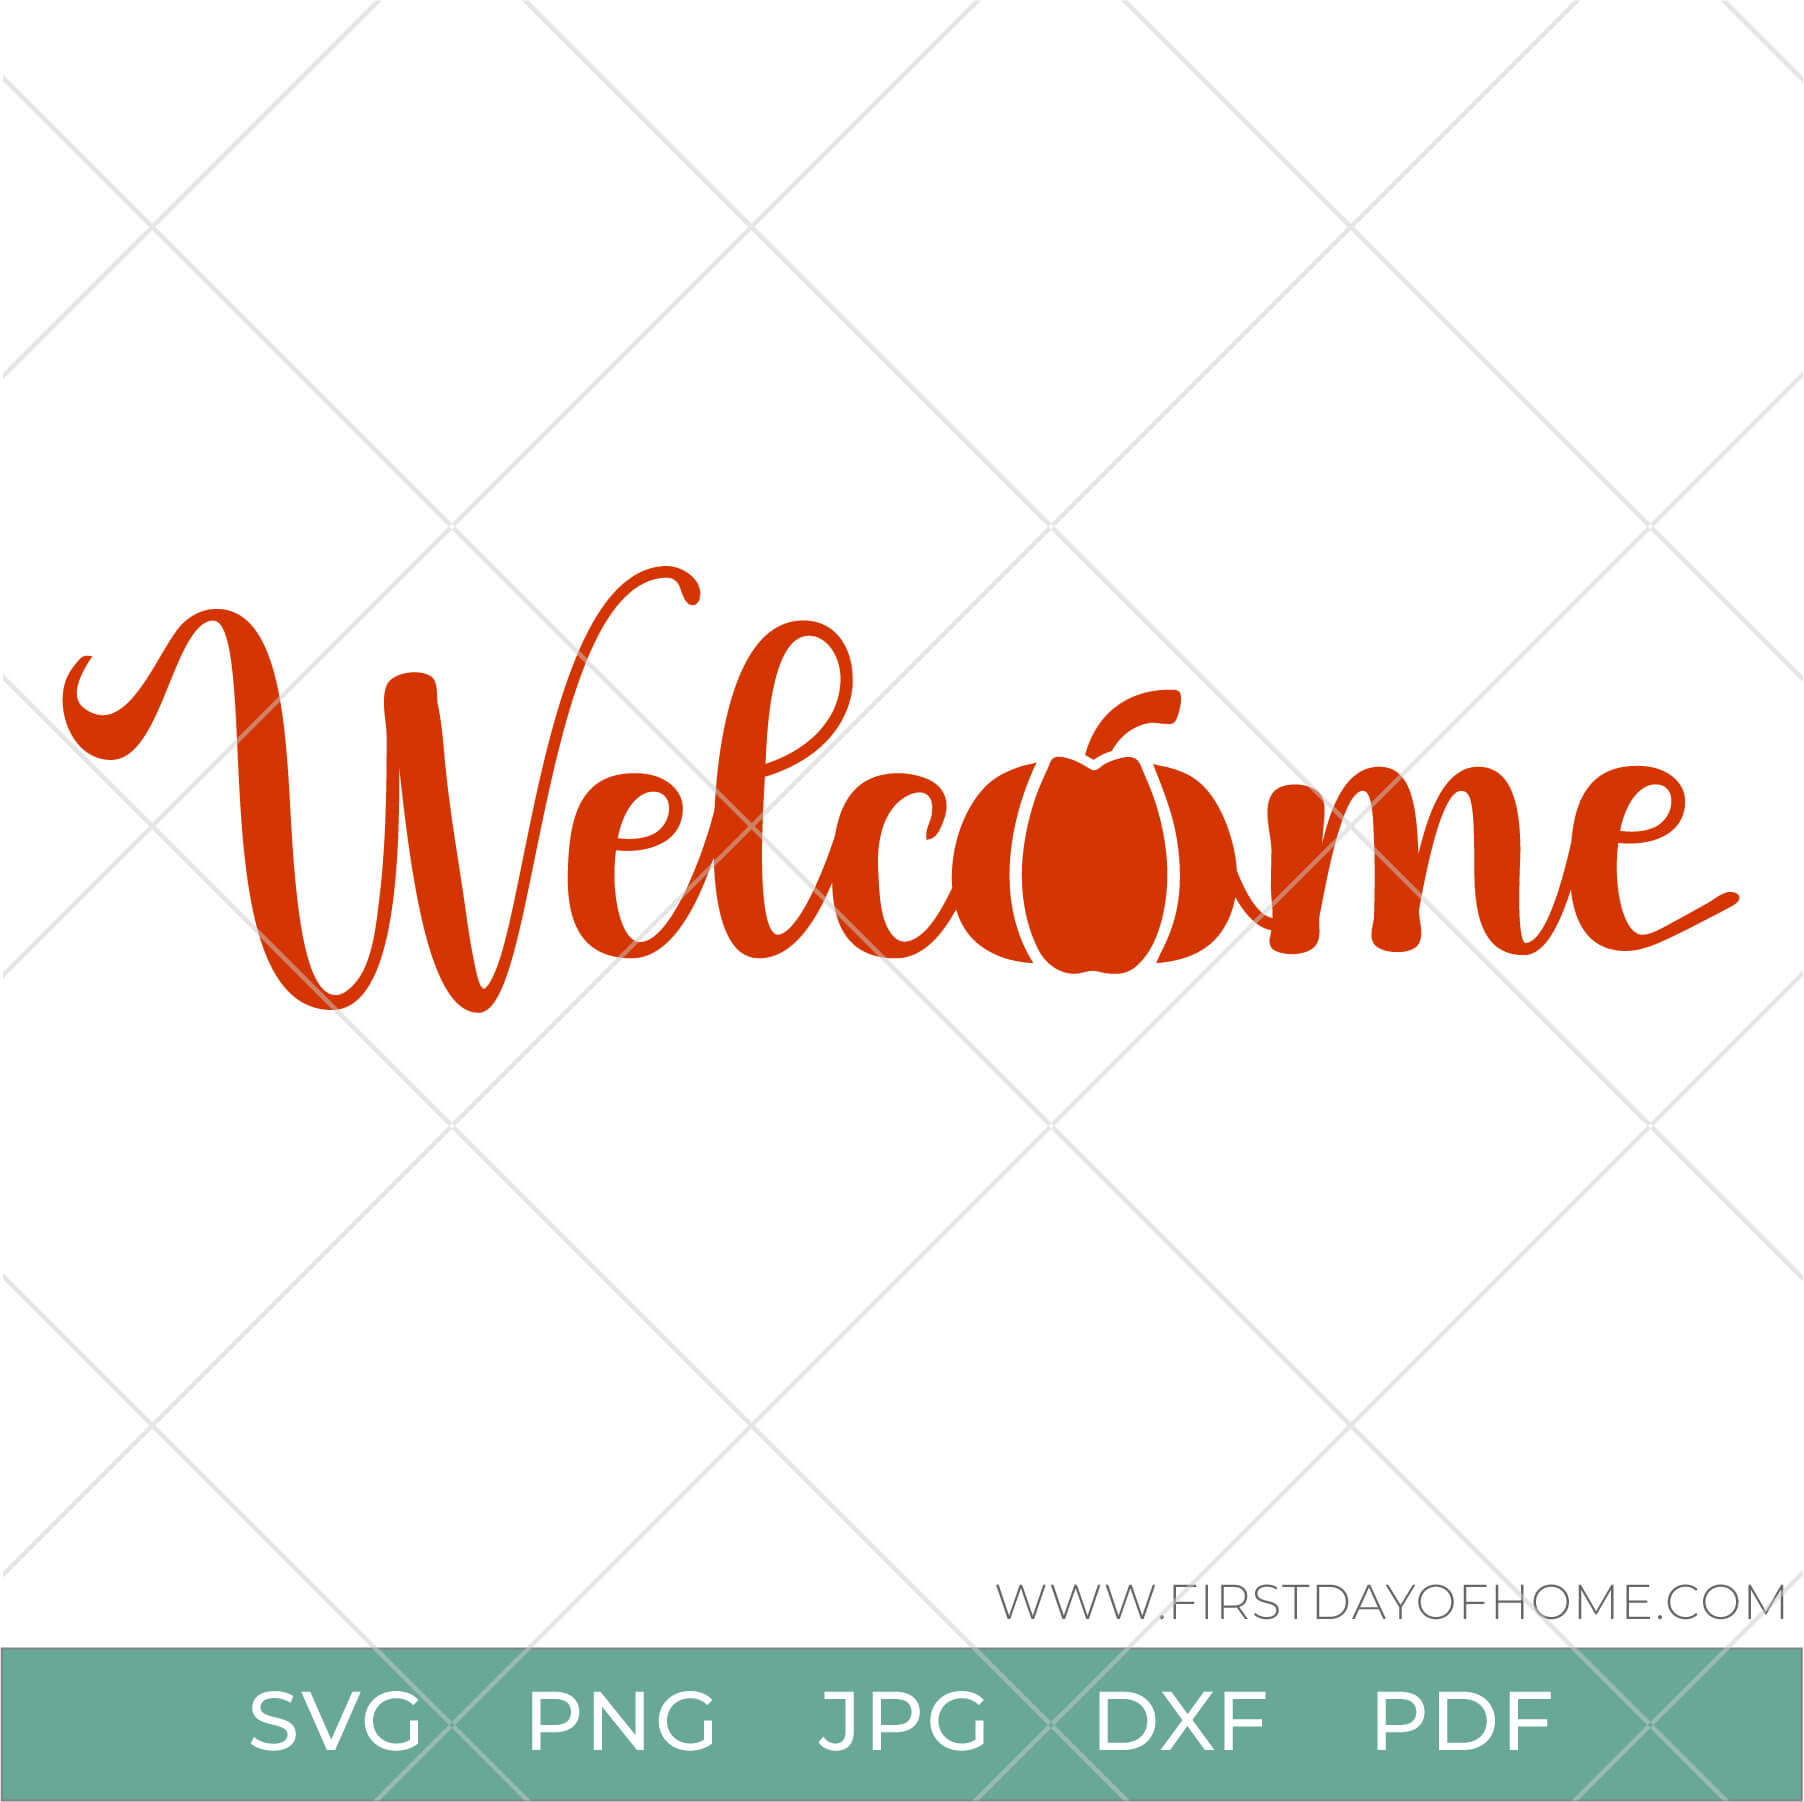 Fall welcome mat digital design with a pumpkin for the "o", available in SVG, PNG, JPG, DXF and PDF file formats